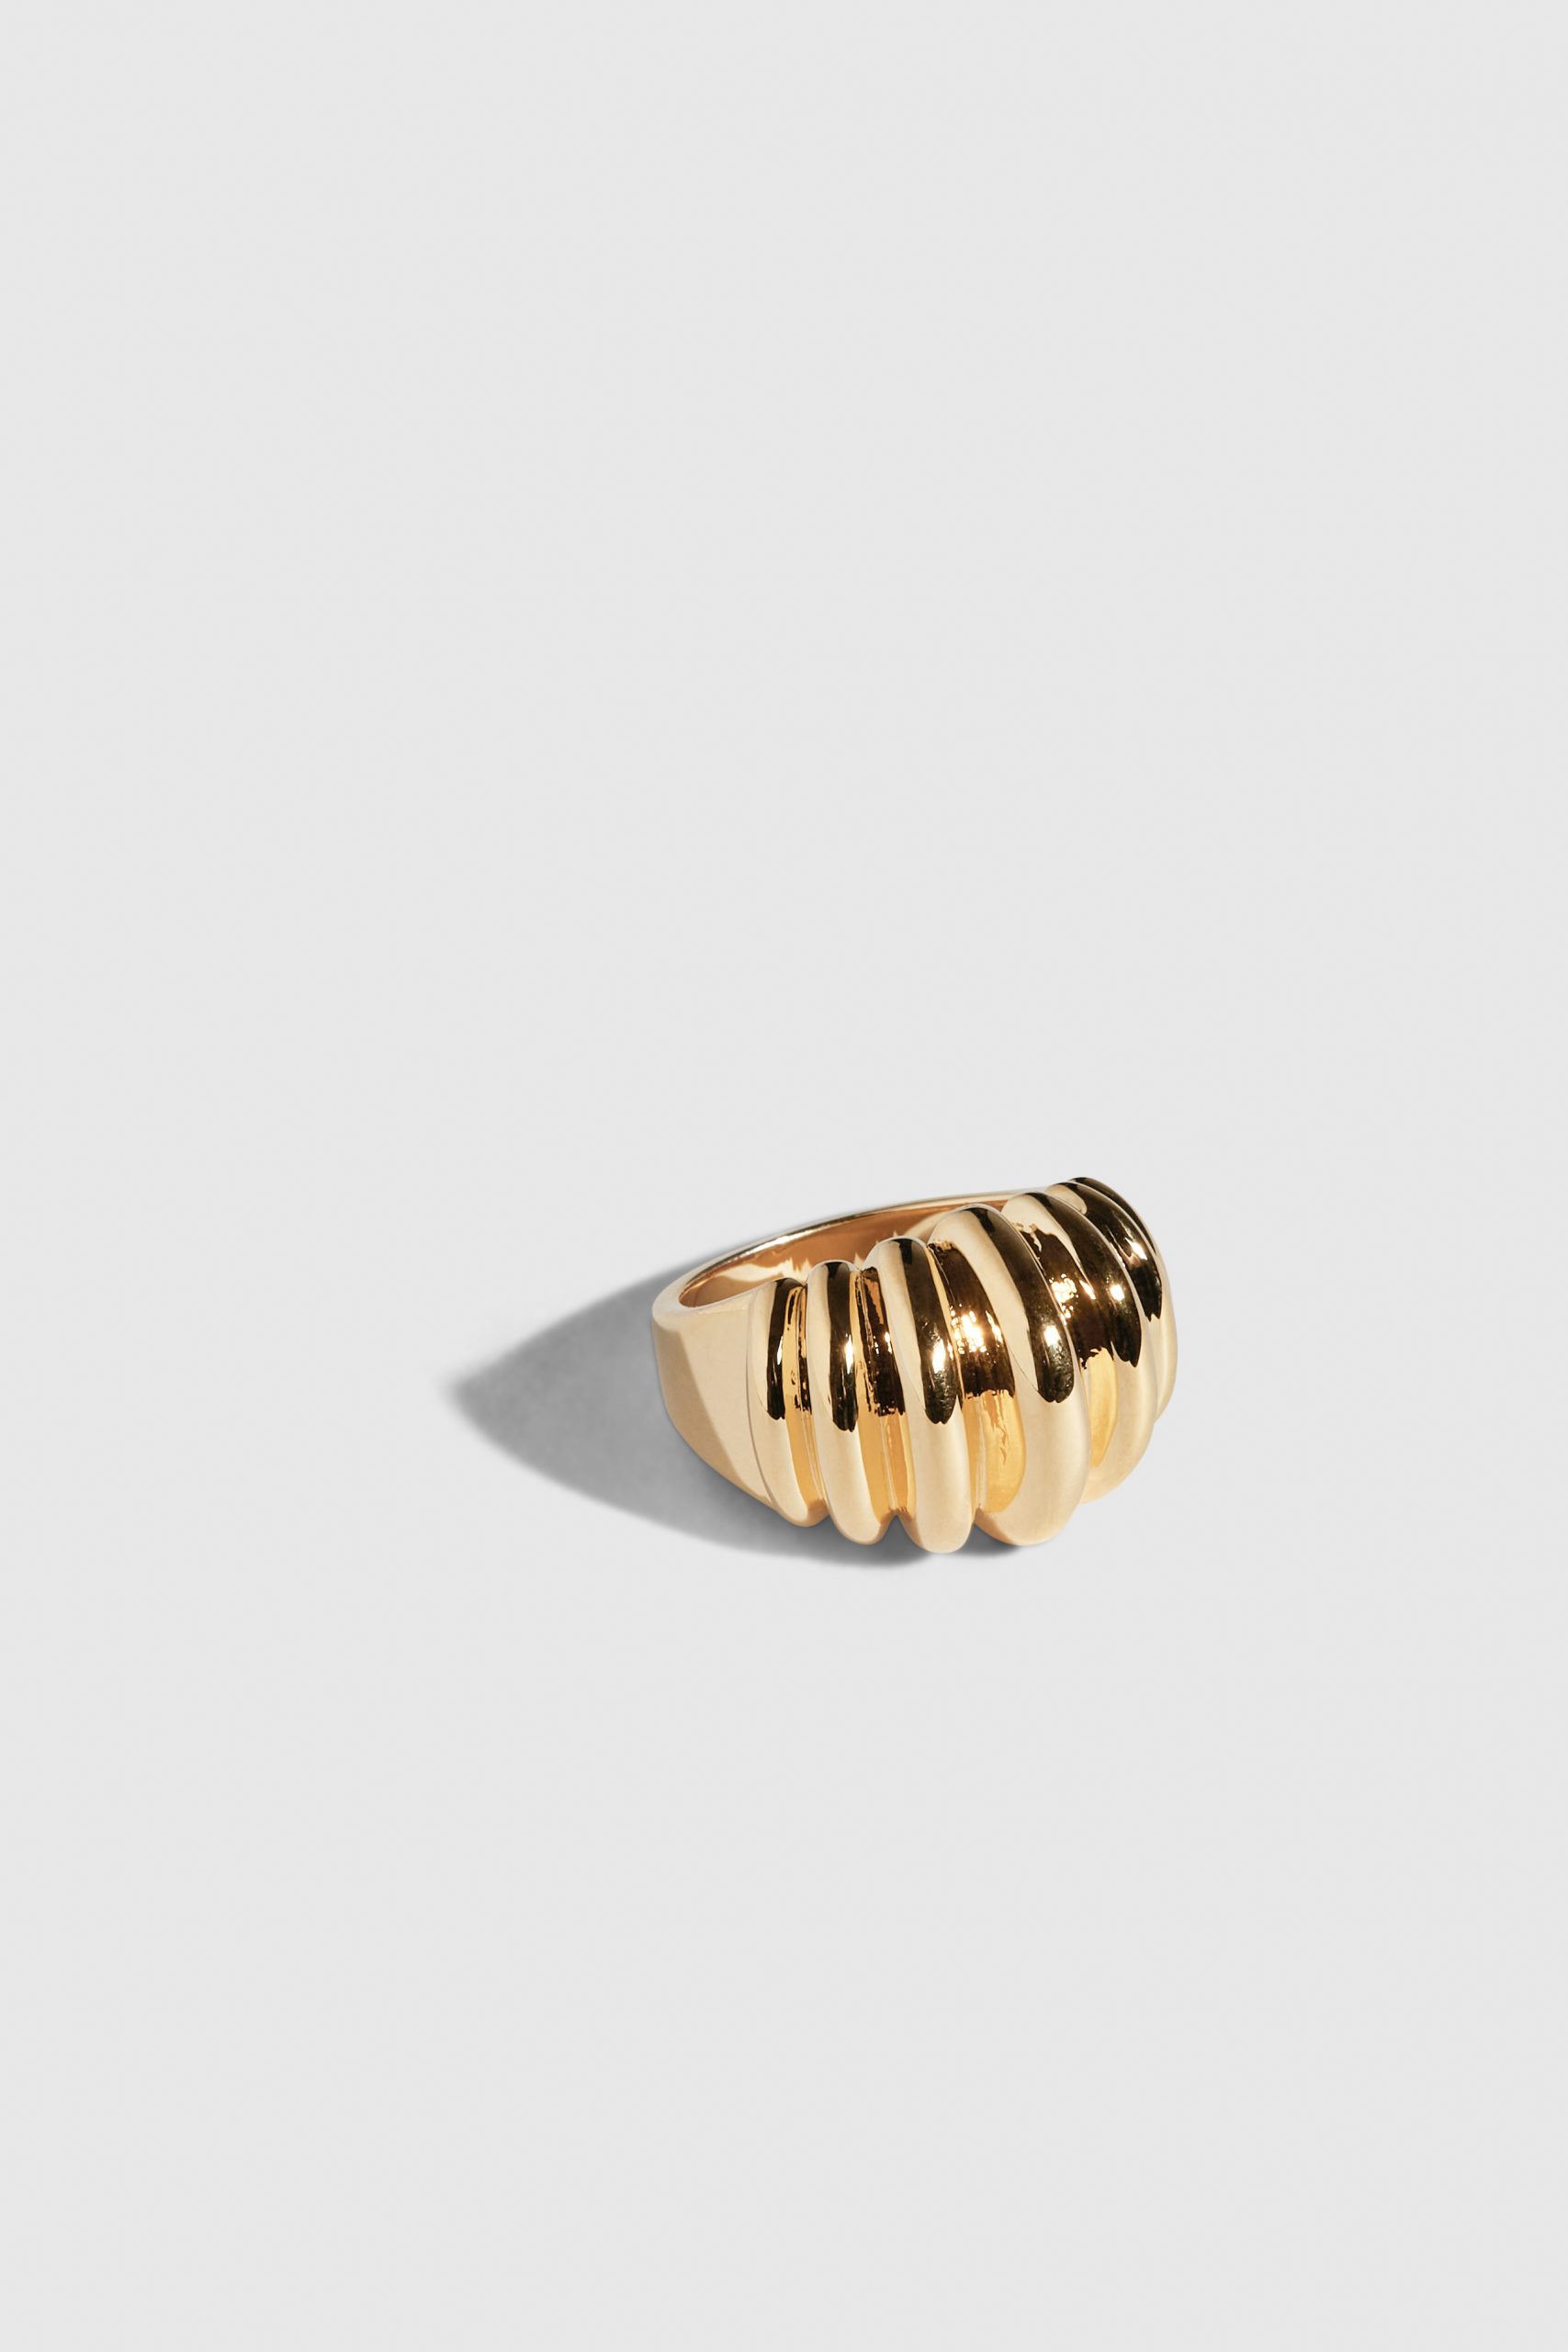 DRAE jewellery dome ring